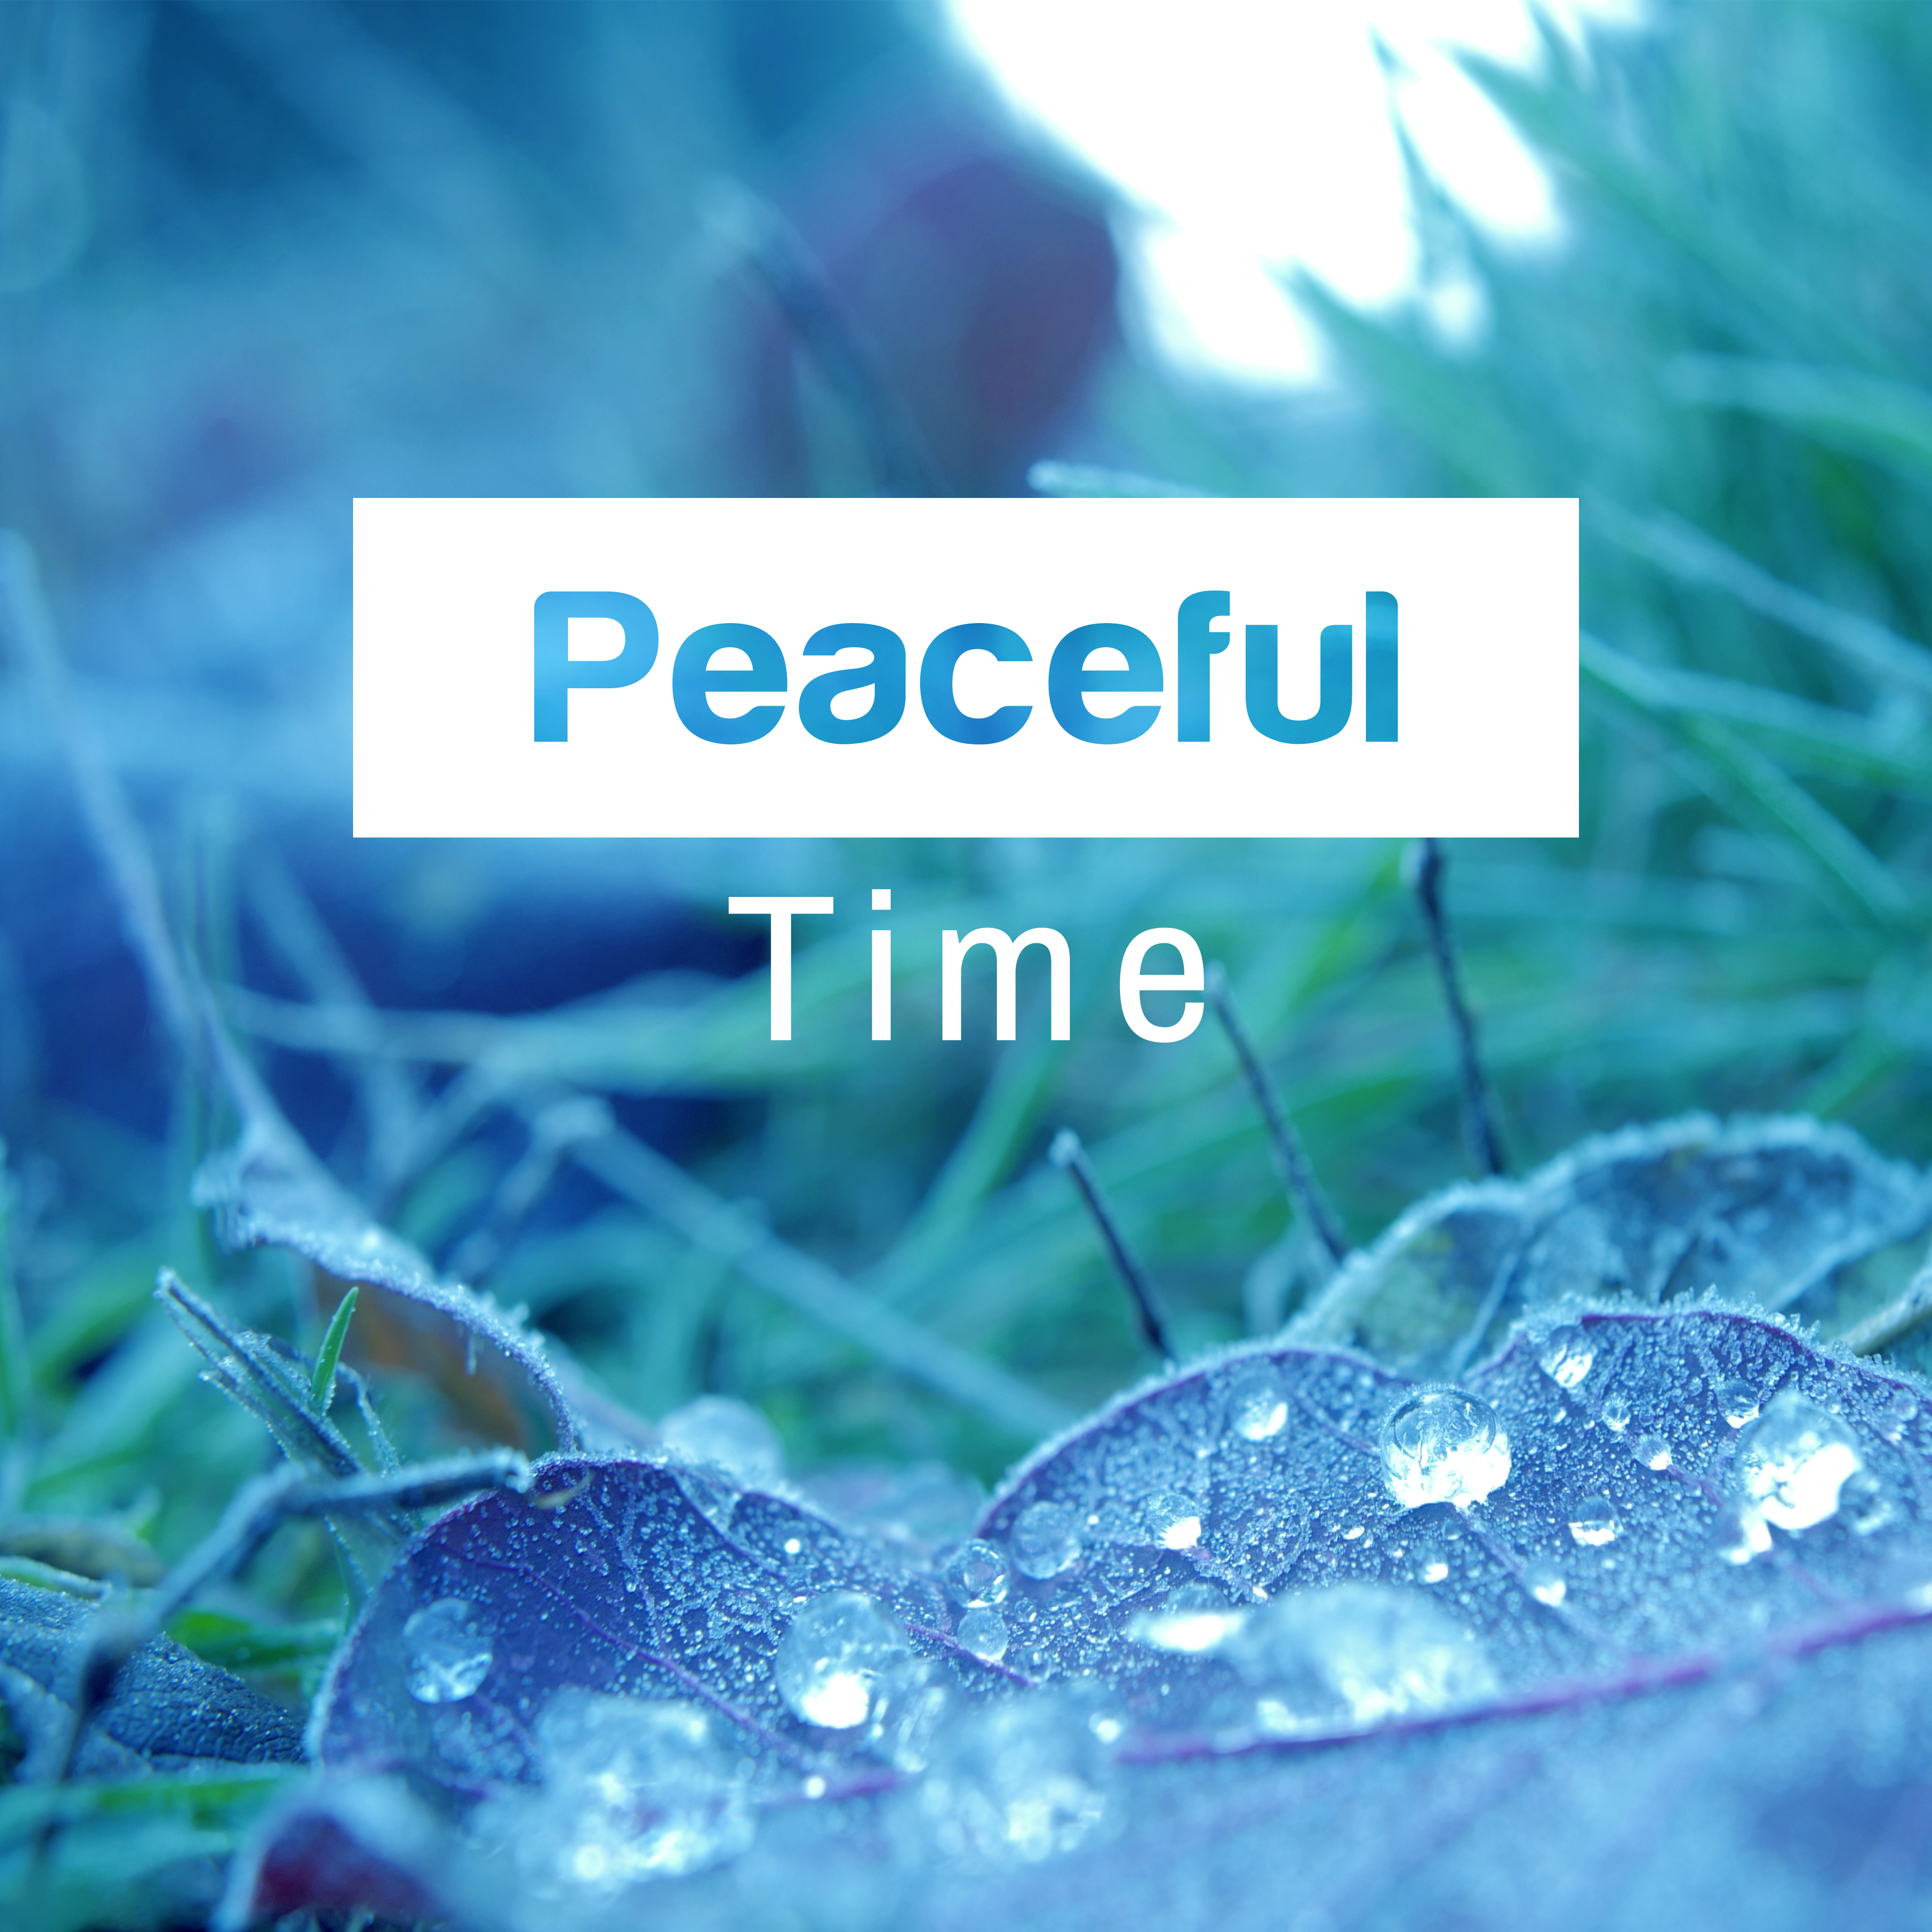 Peaceful Time – Calm Music to Relax, Time to Rest, Soft Sounds, Chilled Memories